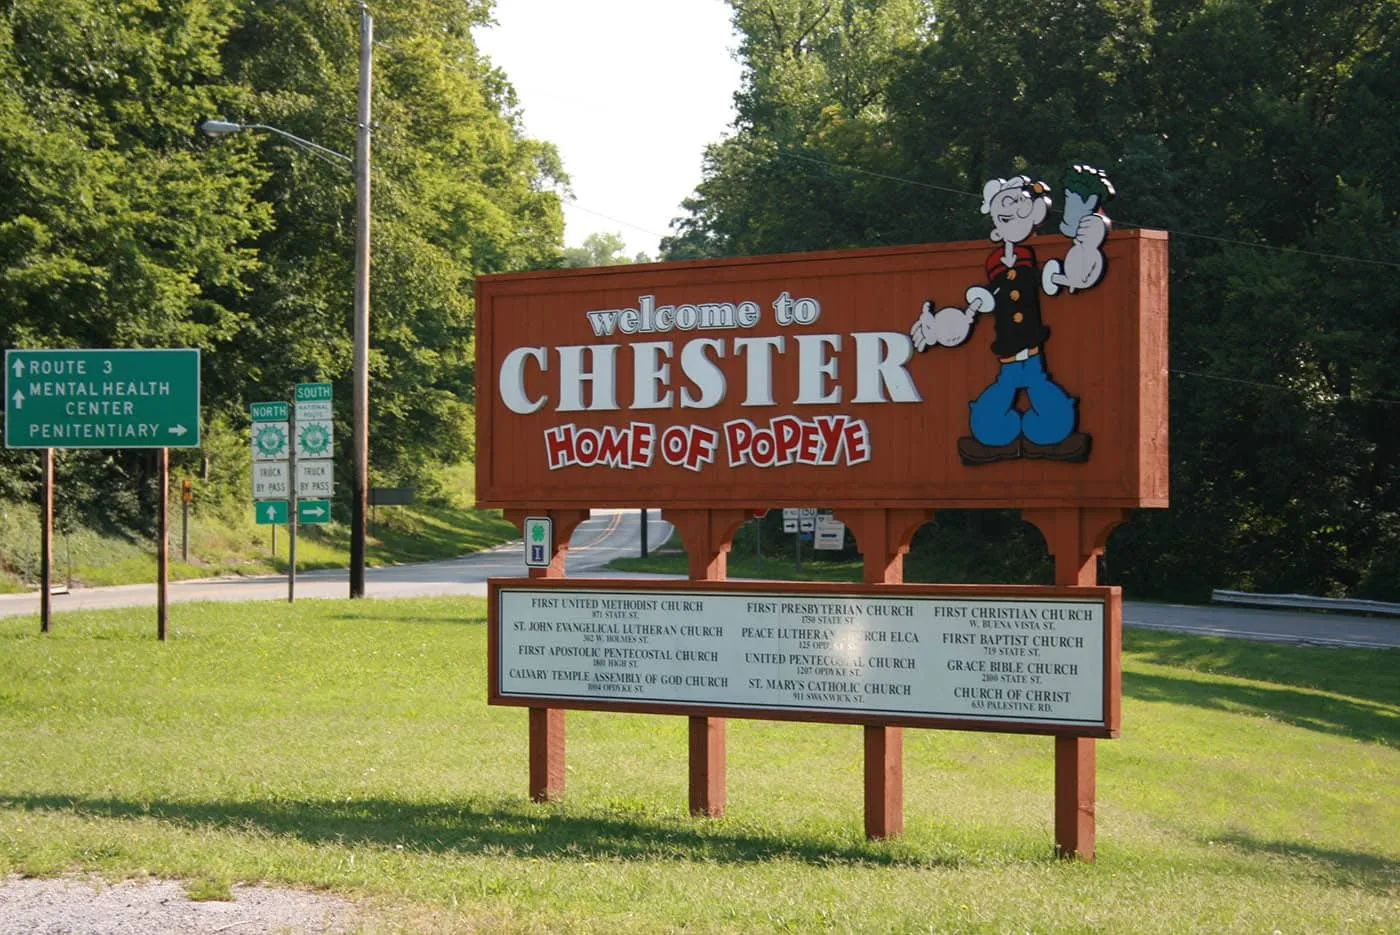 Chester, Illinois - The Home of Popeye The Sailor Man